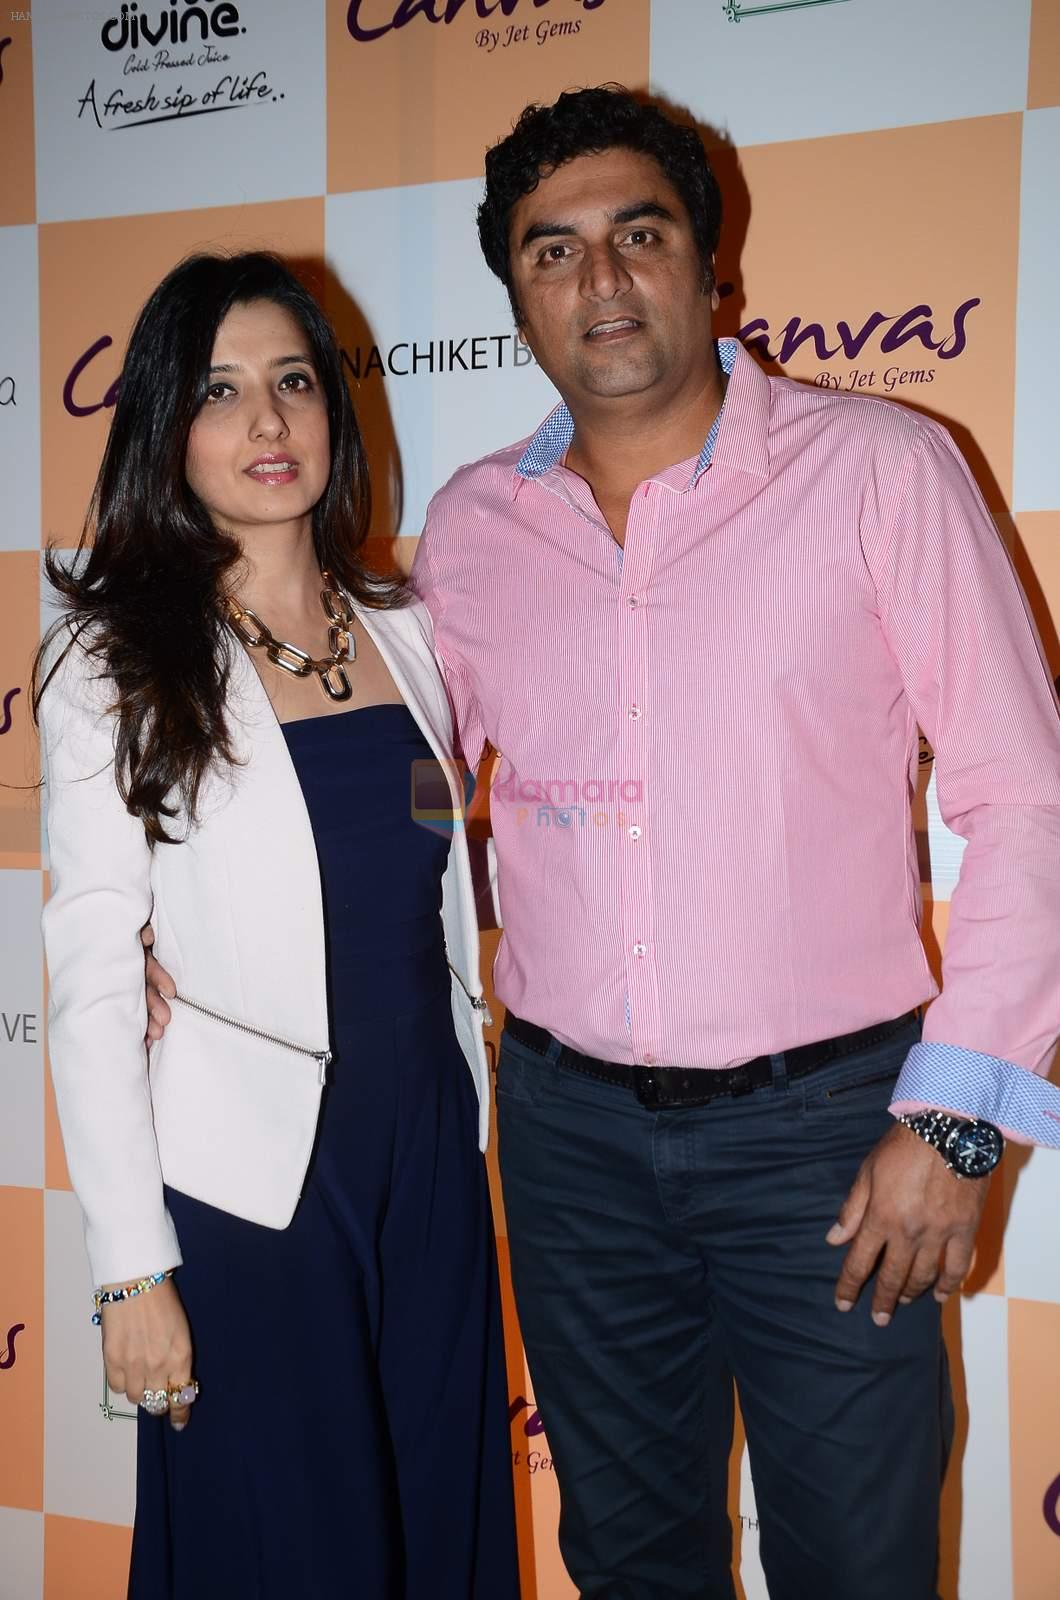 Amy Billimoria at Canvas by Jet Gems launch on 3rd Dec 2015